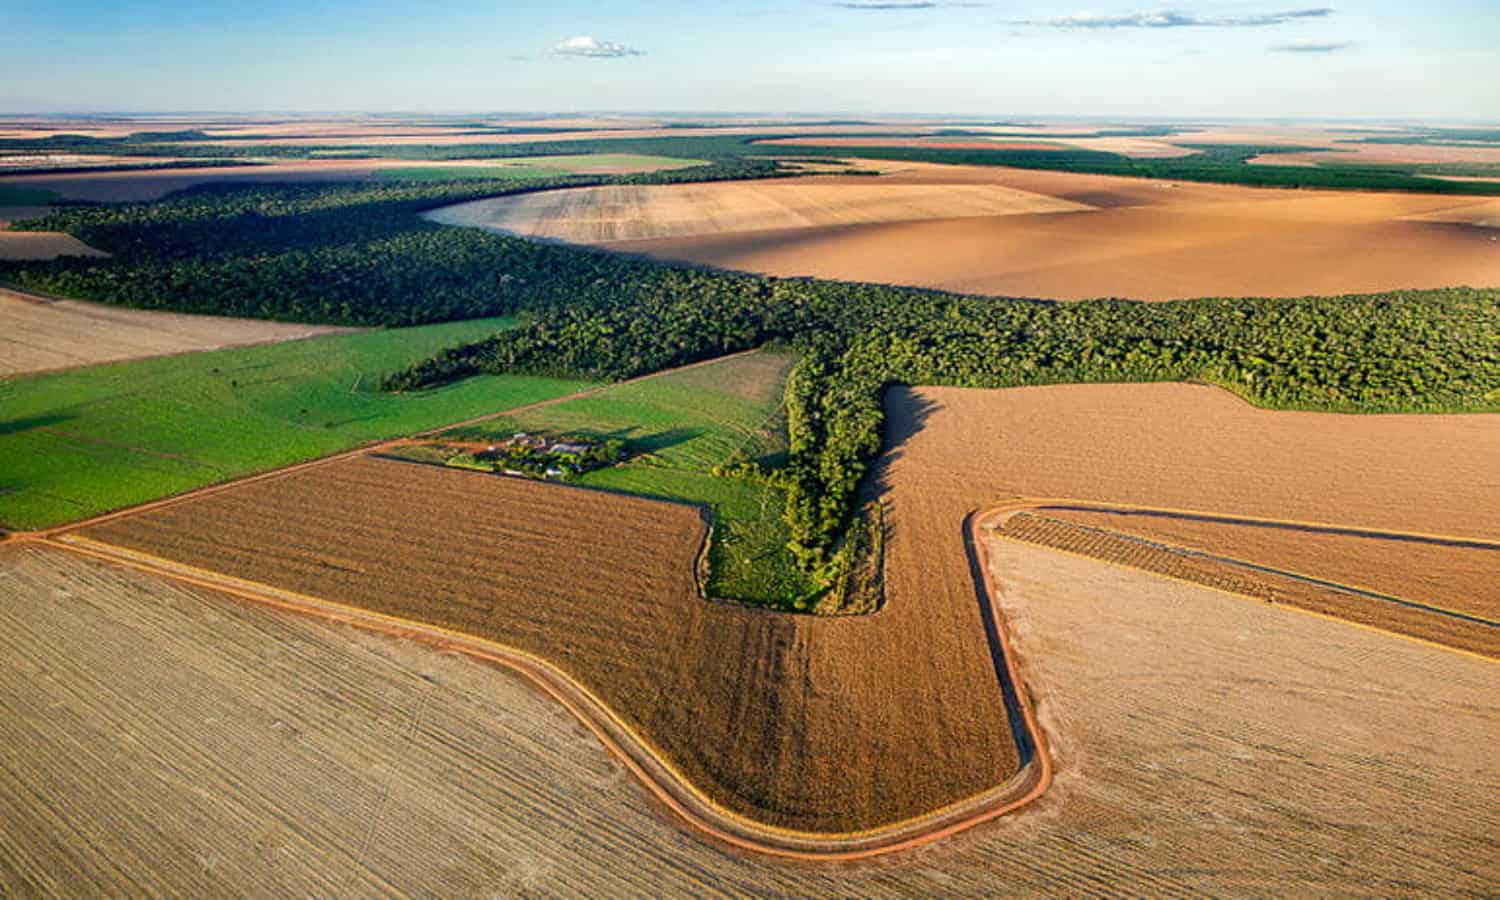 Territorial intelligence reaches new heights in an effort to help Brazil’s soybean industry avoid deforestation and expand sustainably.